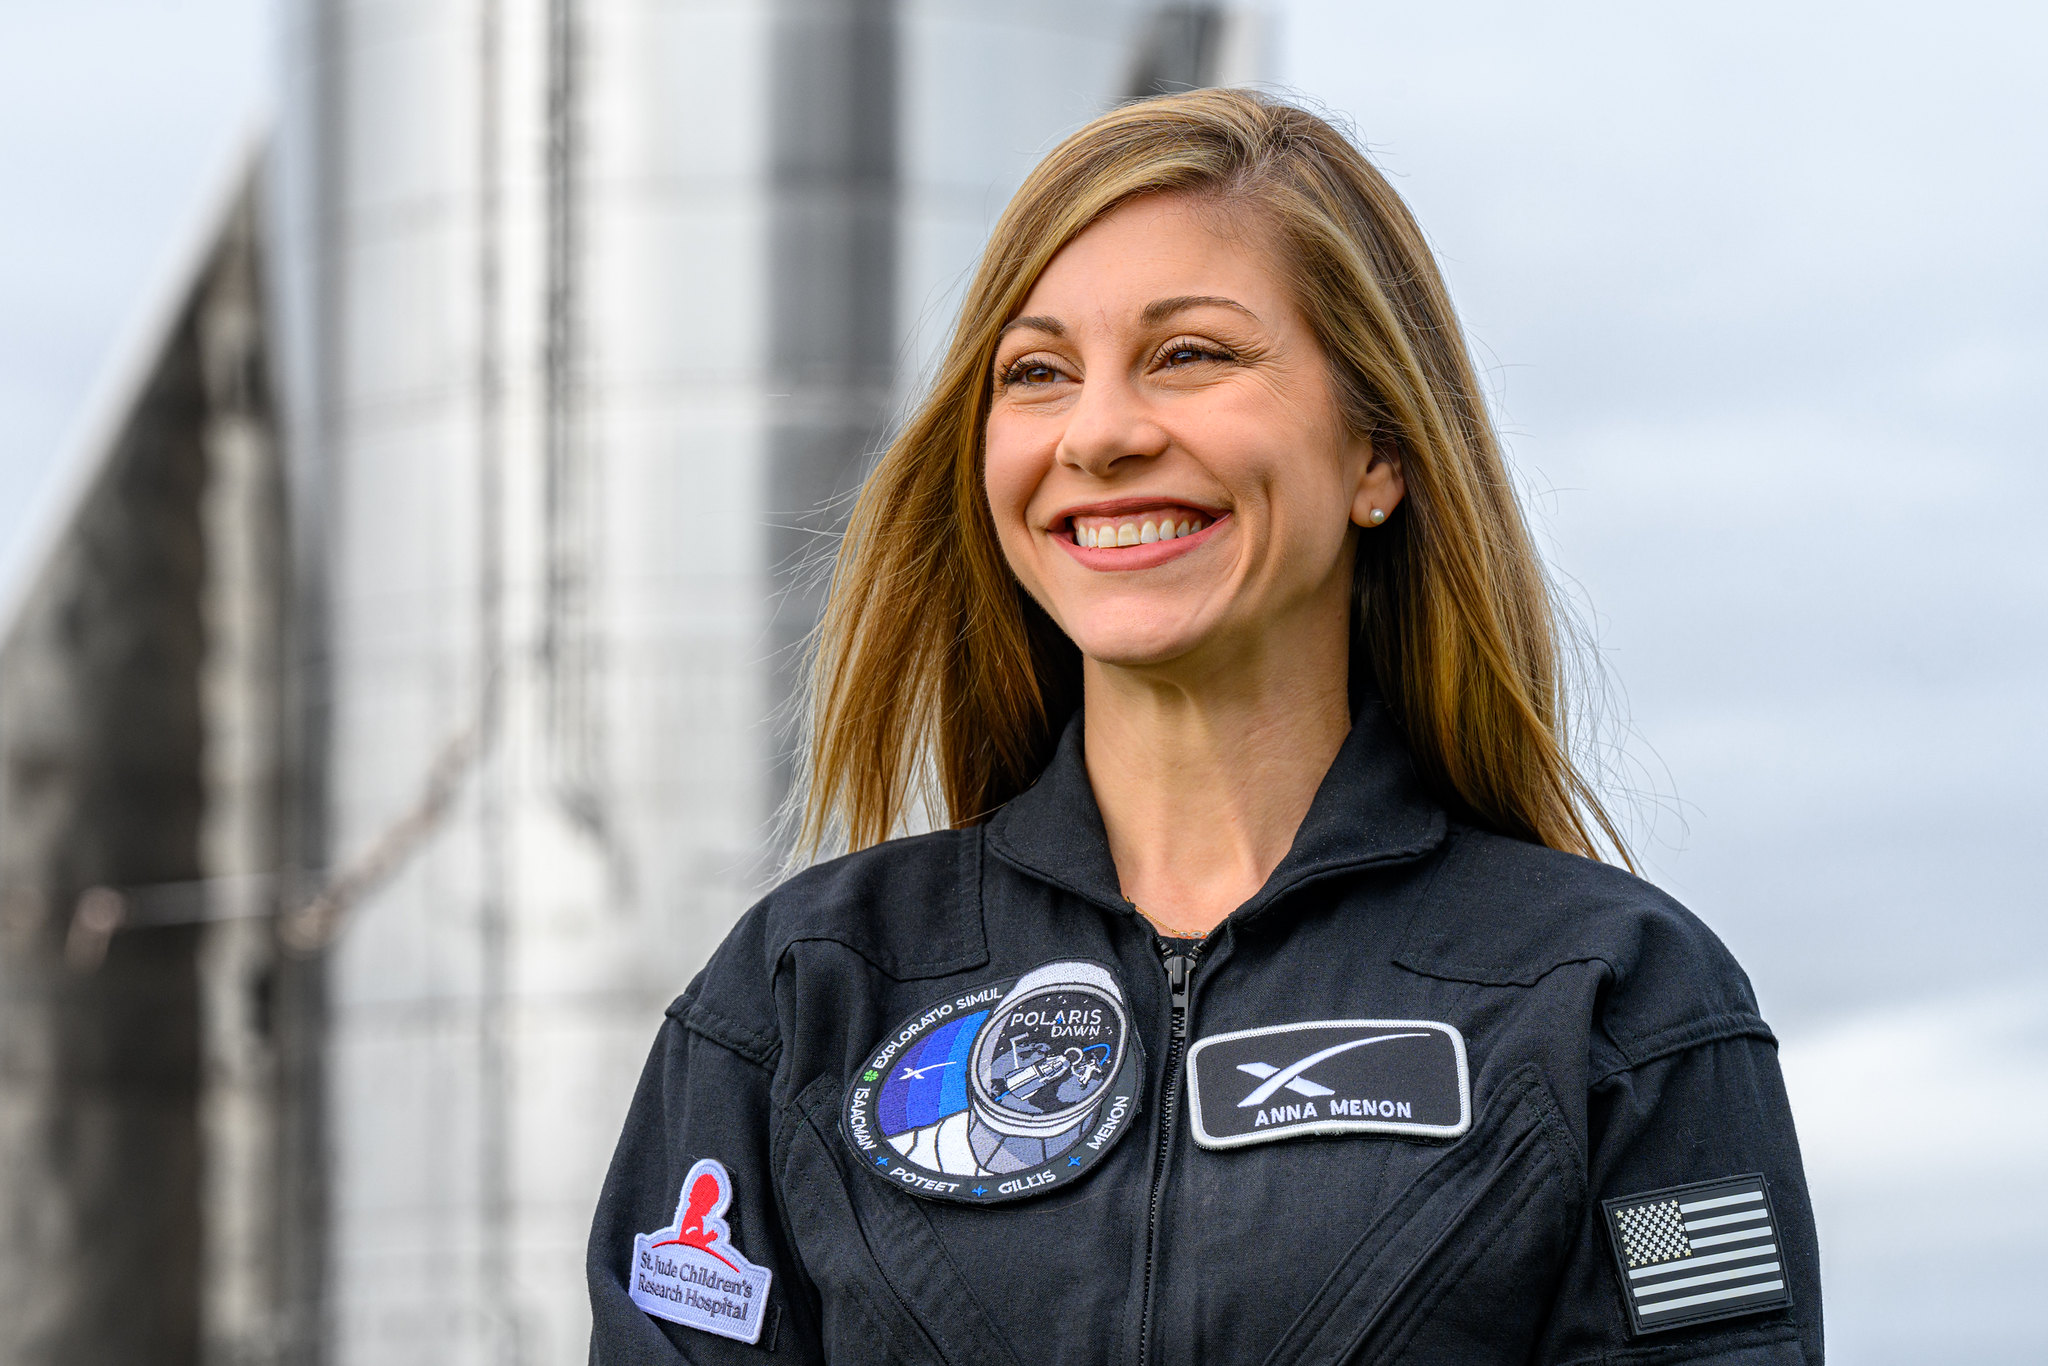 Anna Menon, a SpaceX Lead Space Operations Engineer who manages crew operations development and serves as mission director and crew communicator in mission control, will serve as a mission specialist and medical officer on the Polaris Dawn mission.